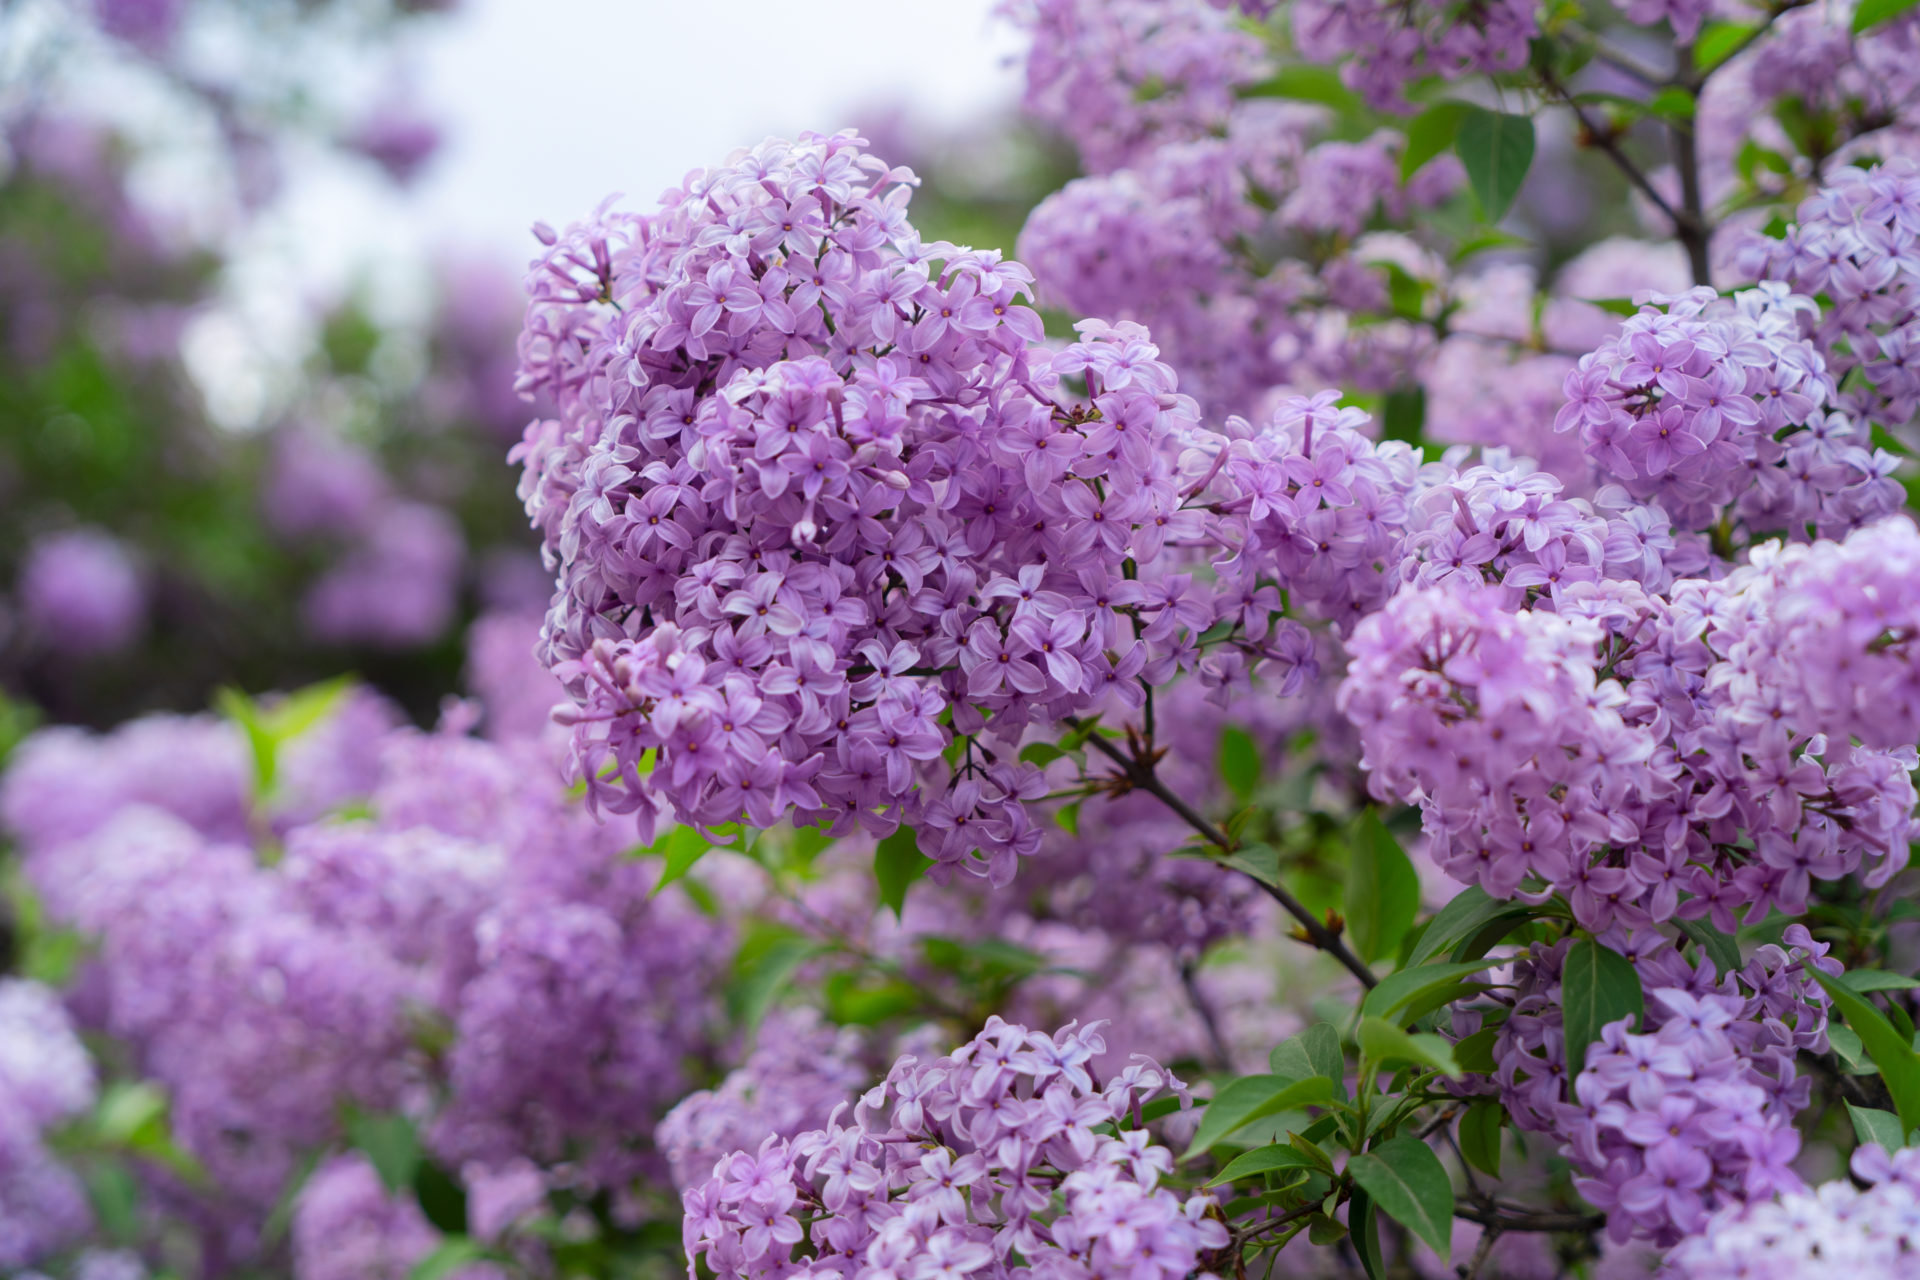 Lilac trees get fertilized in the fall